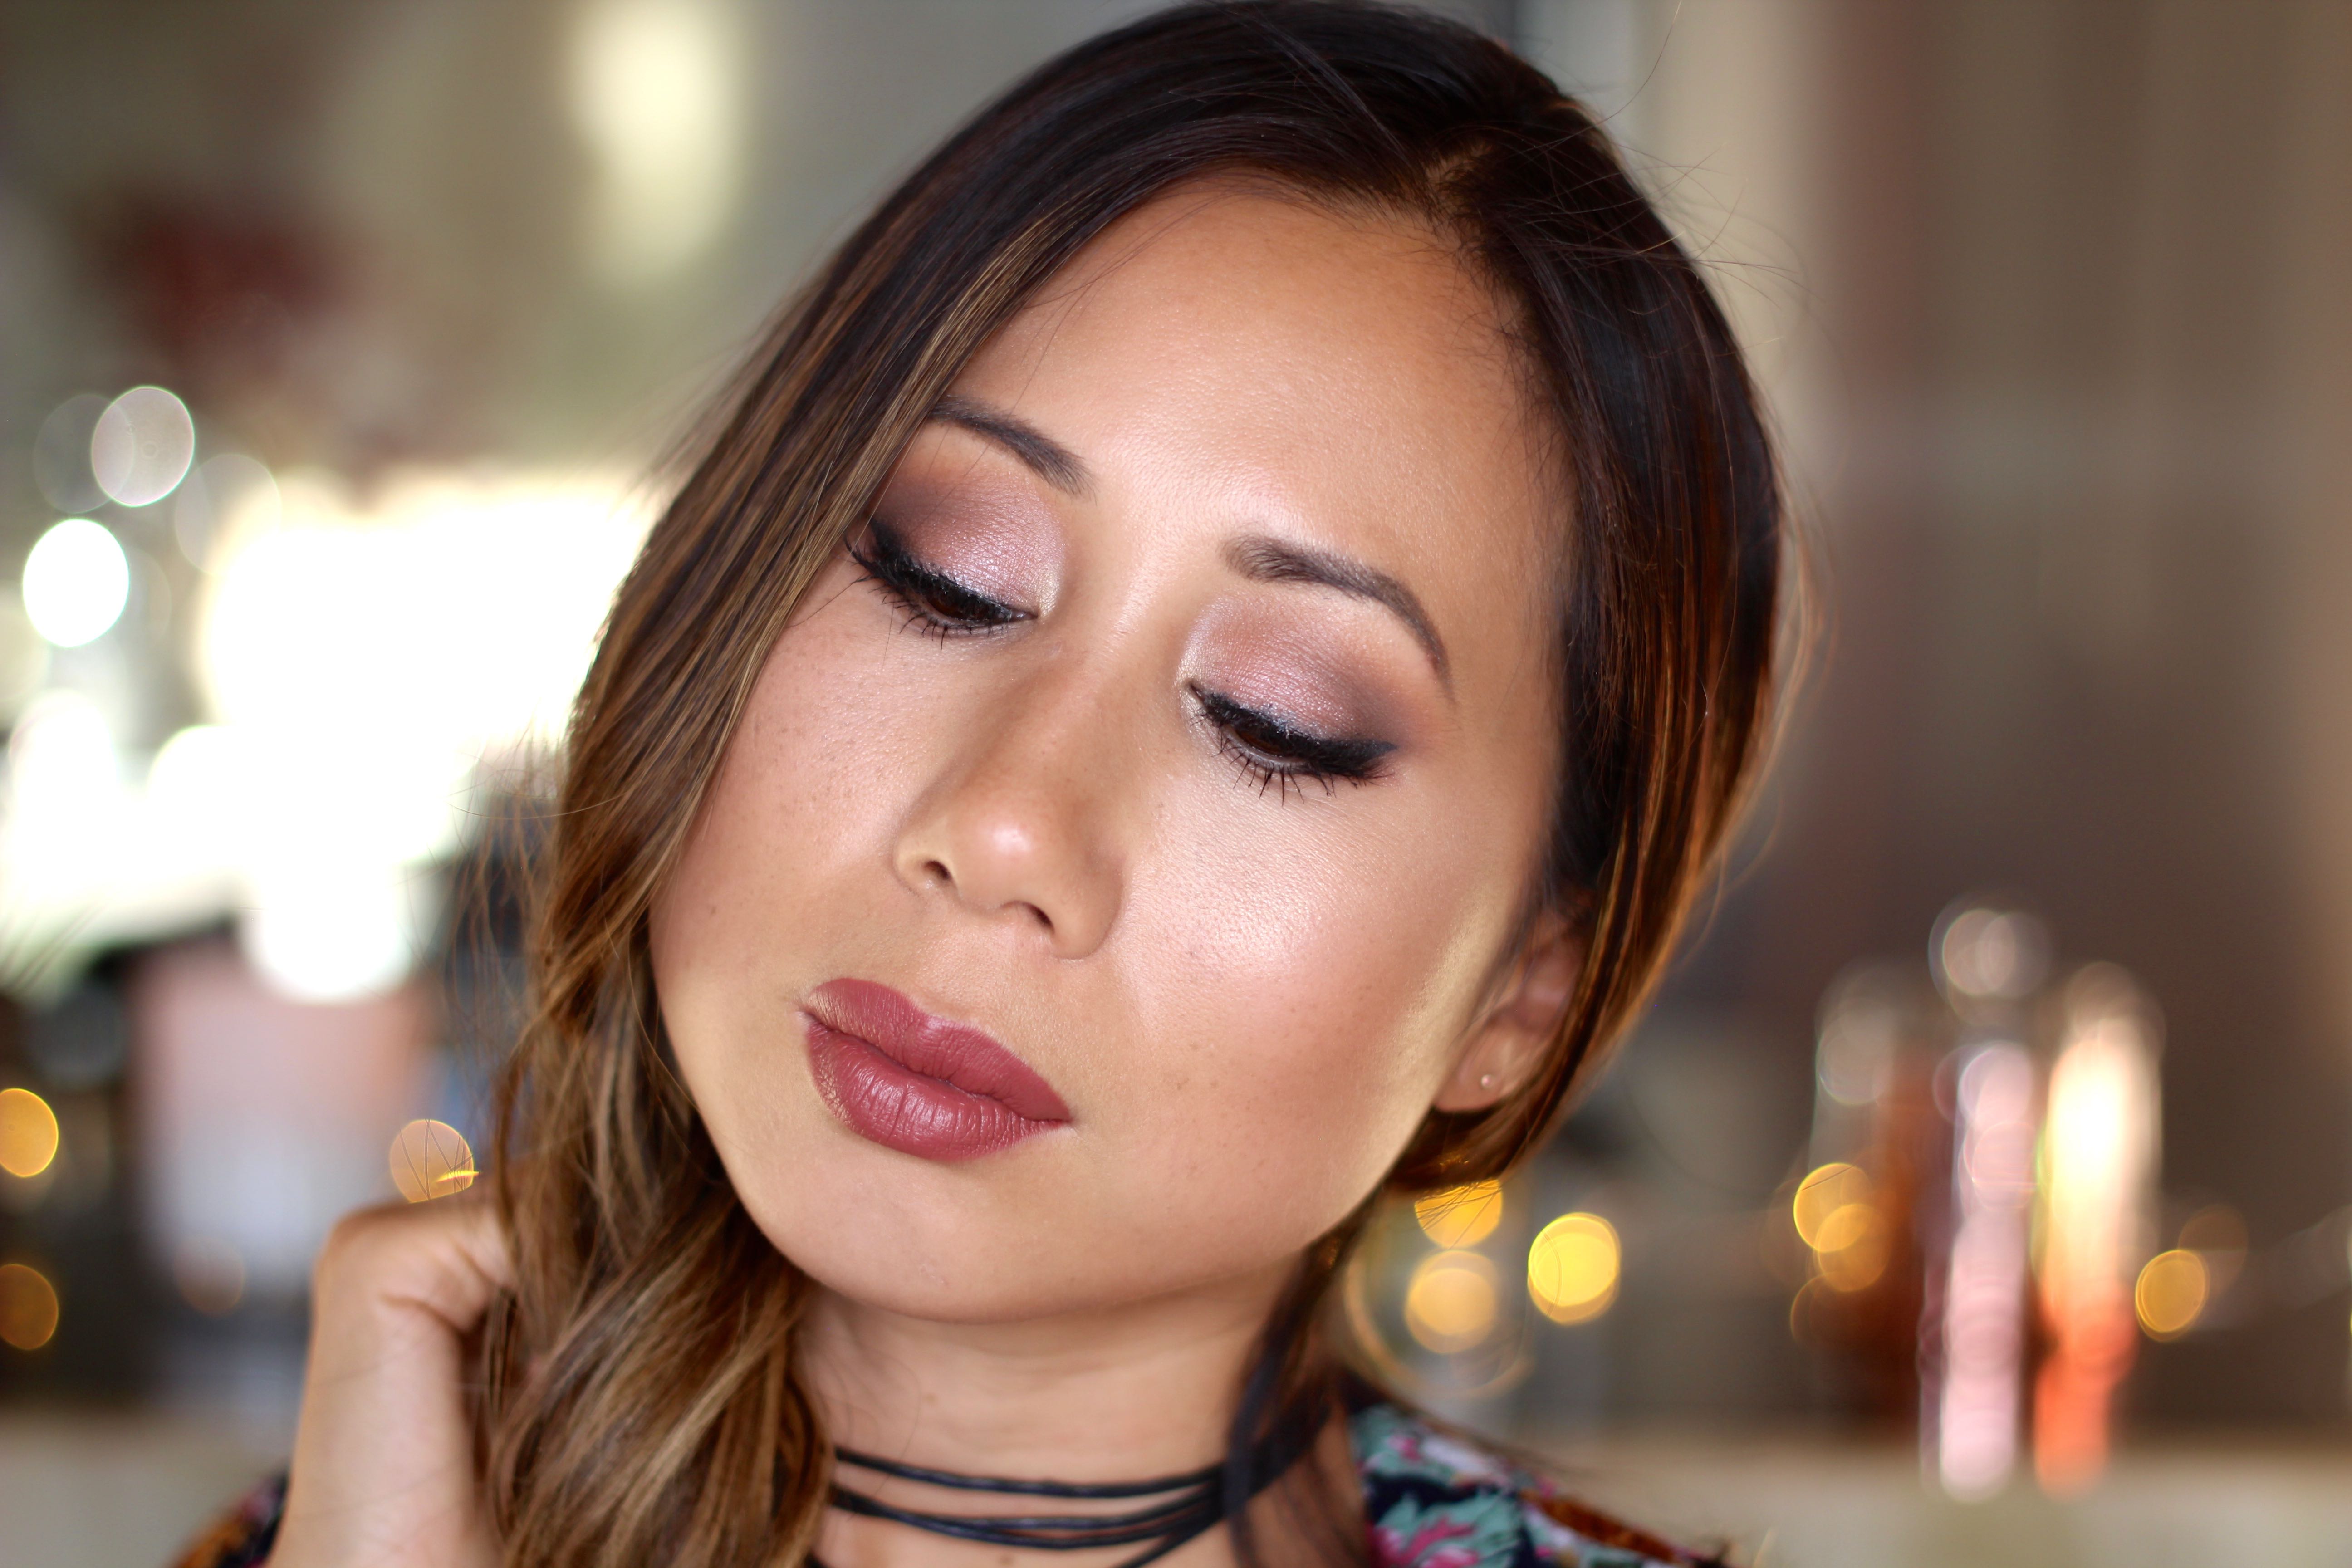 90's Inspired Makeup - Warm, Neutral Tones & Glowy Skin by @Facemadeup